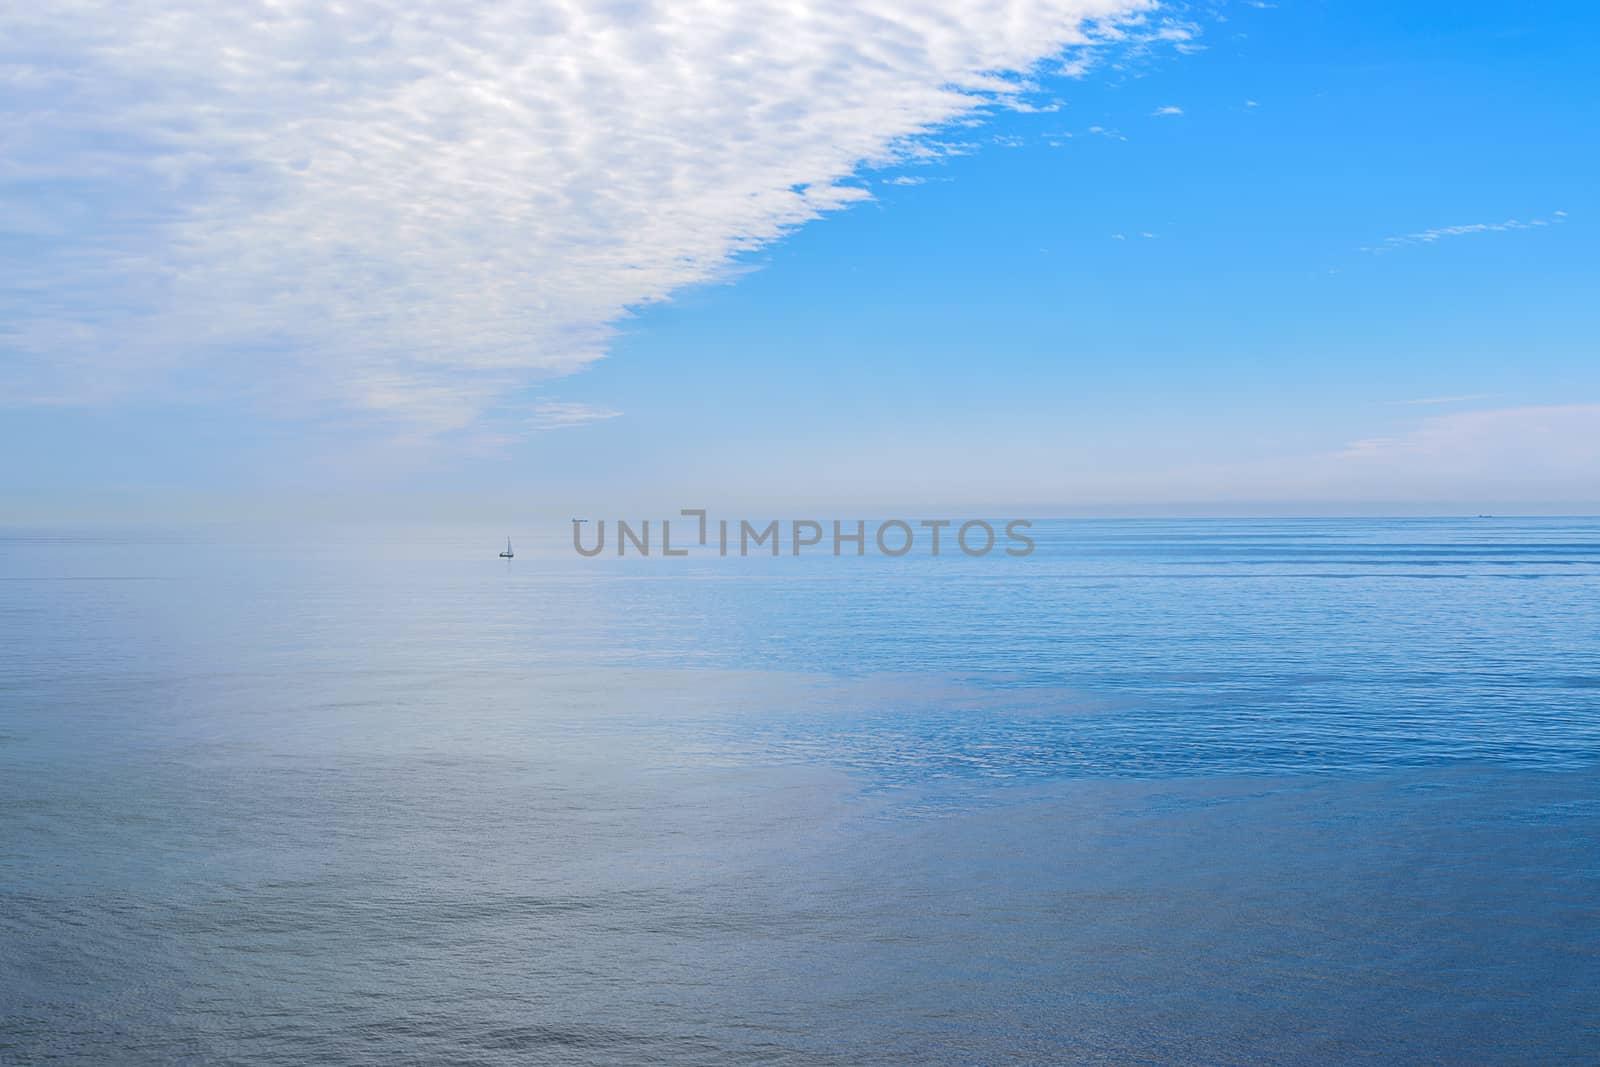 The blue sky and clouds reflect on the calm surface of the ocean and the ships in the distance.